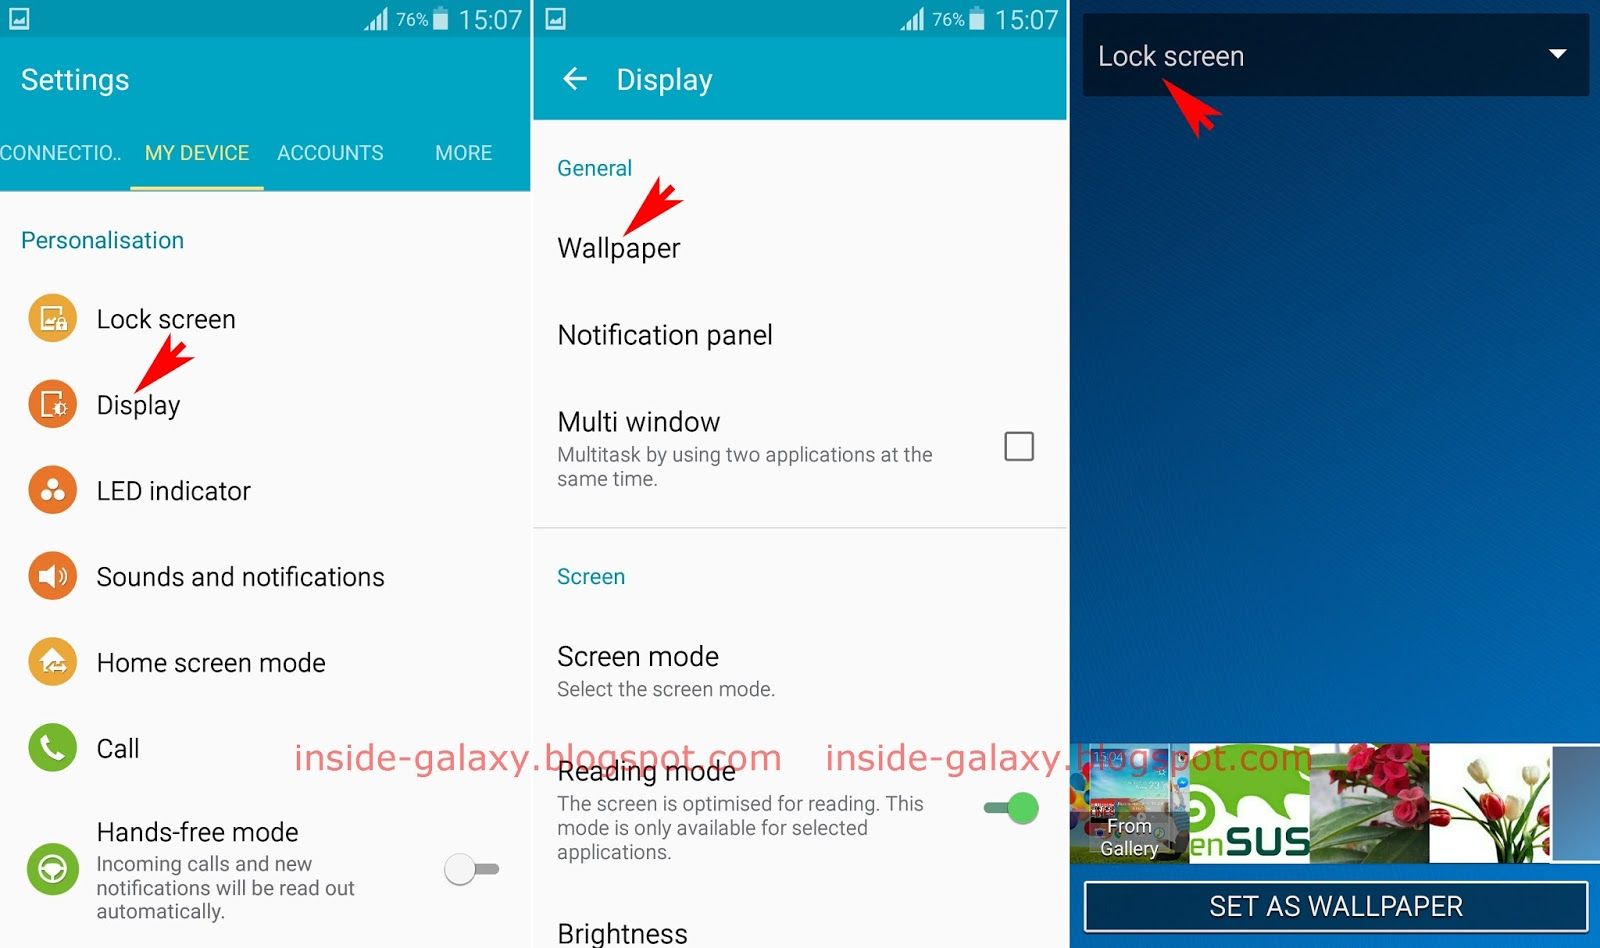 How to Change Wallpaper Settings from Blurry to Clear Image - Innov8tiv